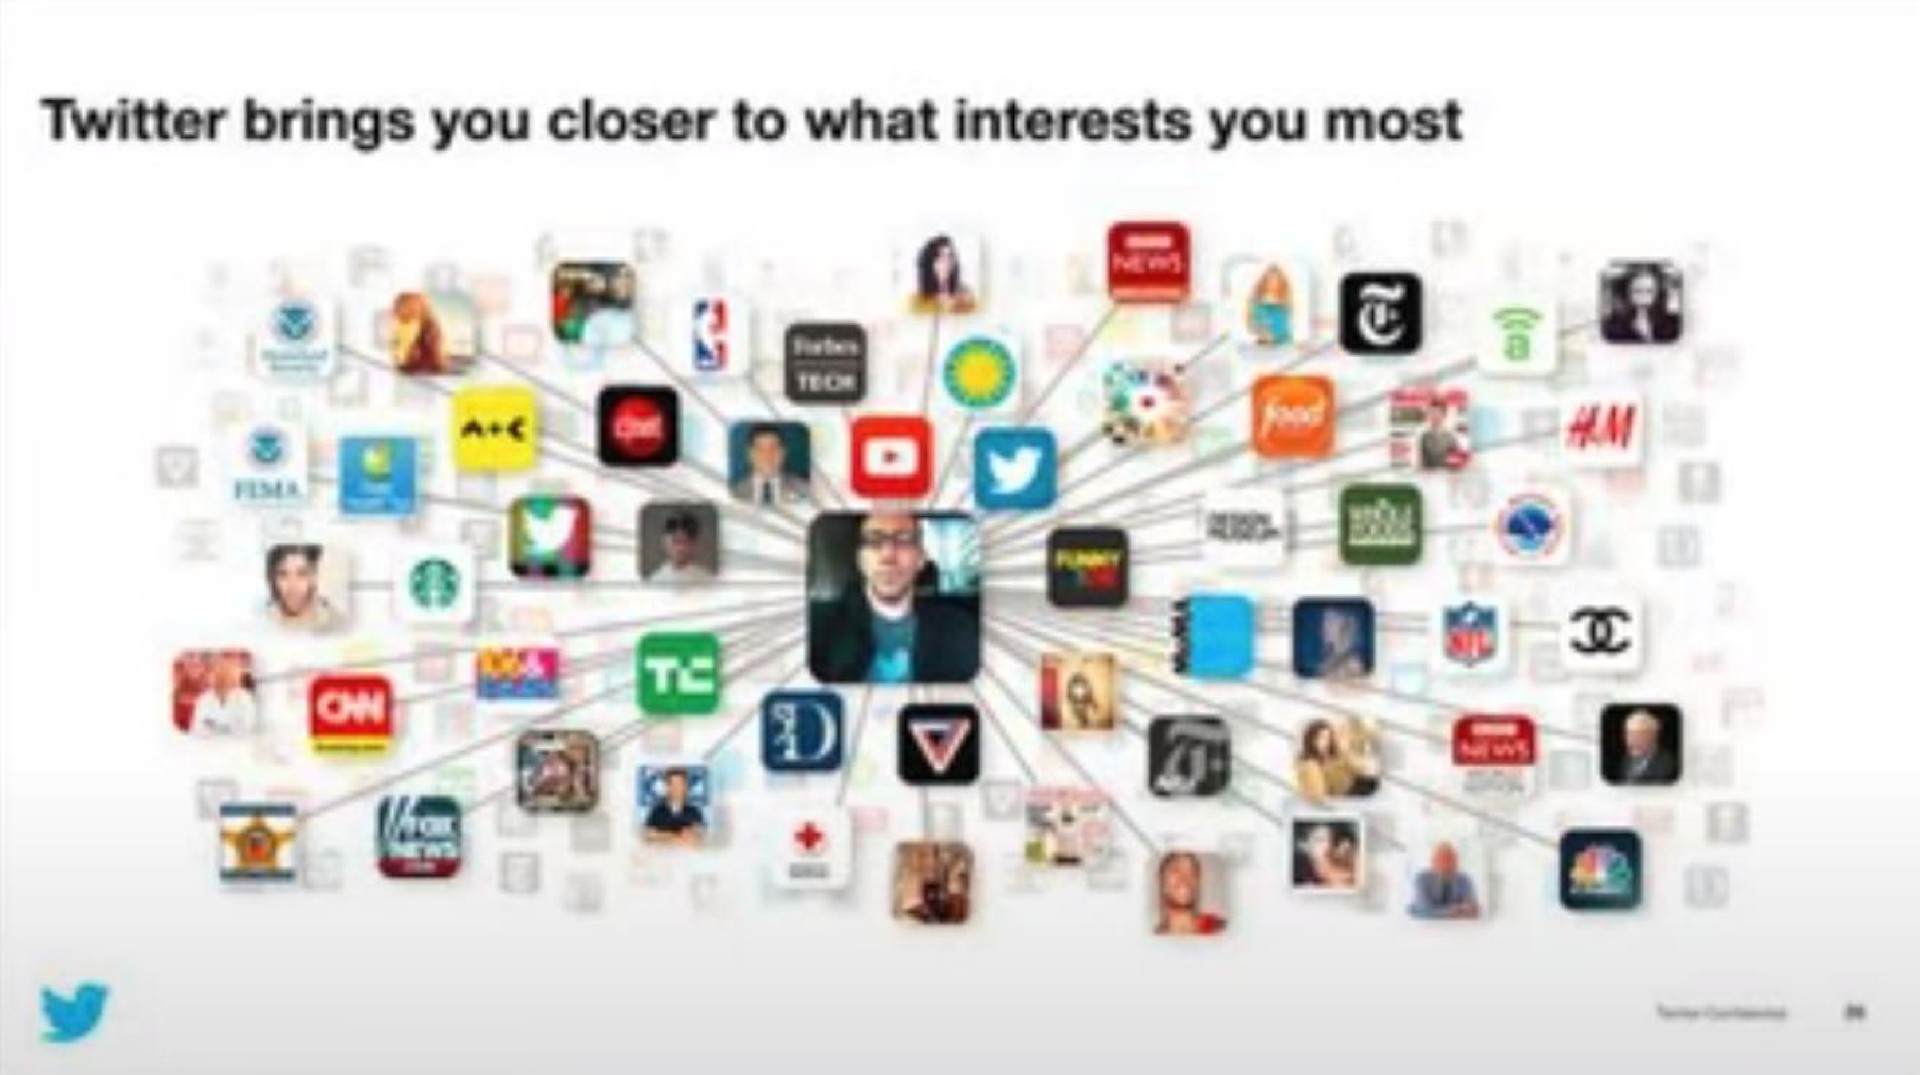 twitter brings you closer to what interests you most | Twitter